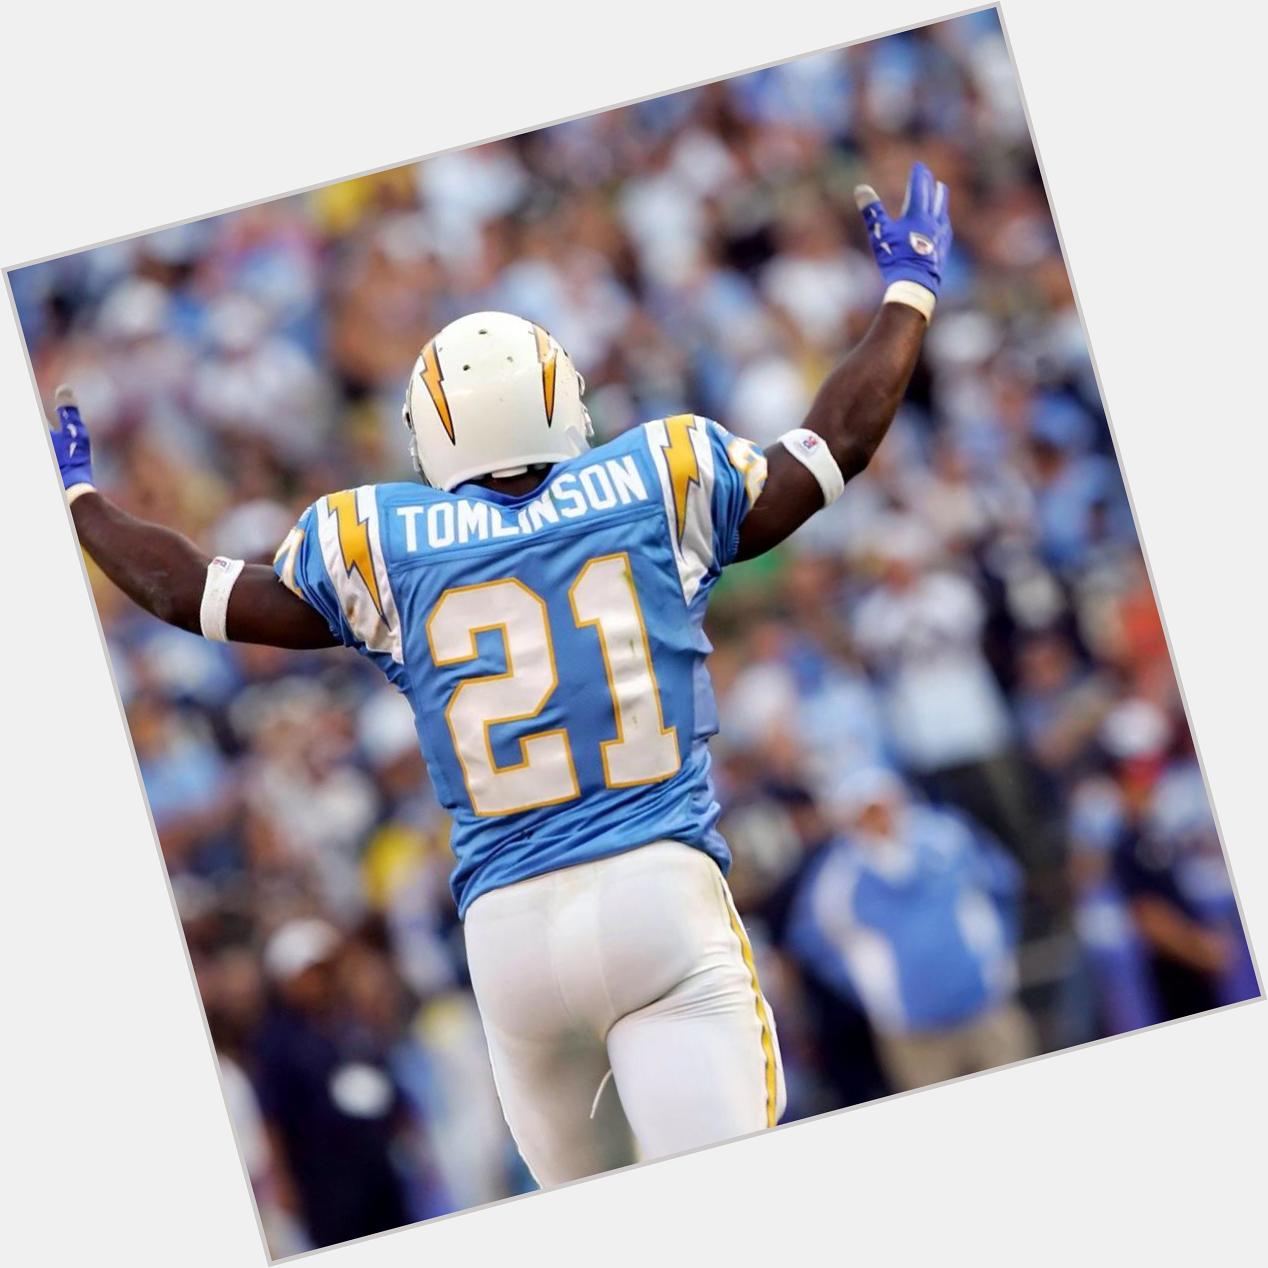 Happy birthday to the man I idolize most  miss watching you play  ladainian Tomlinson    